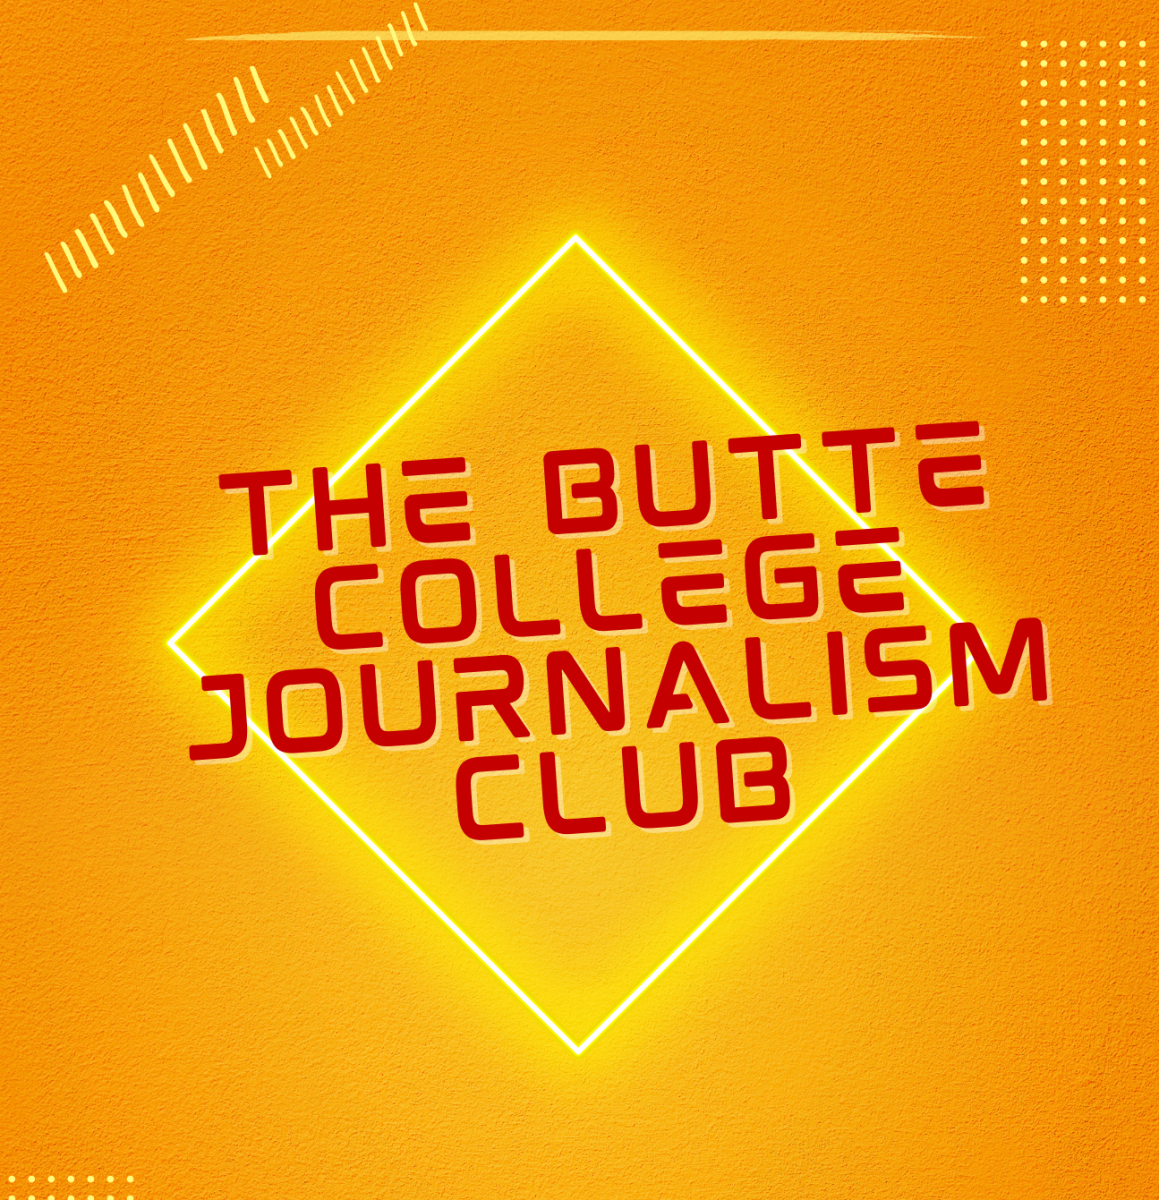 The Butte College Journalism Club flyer